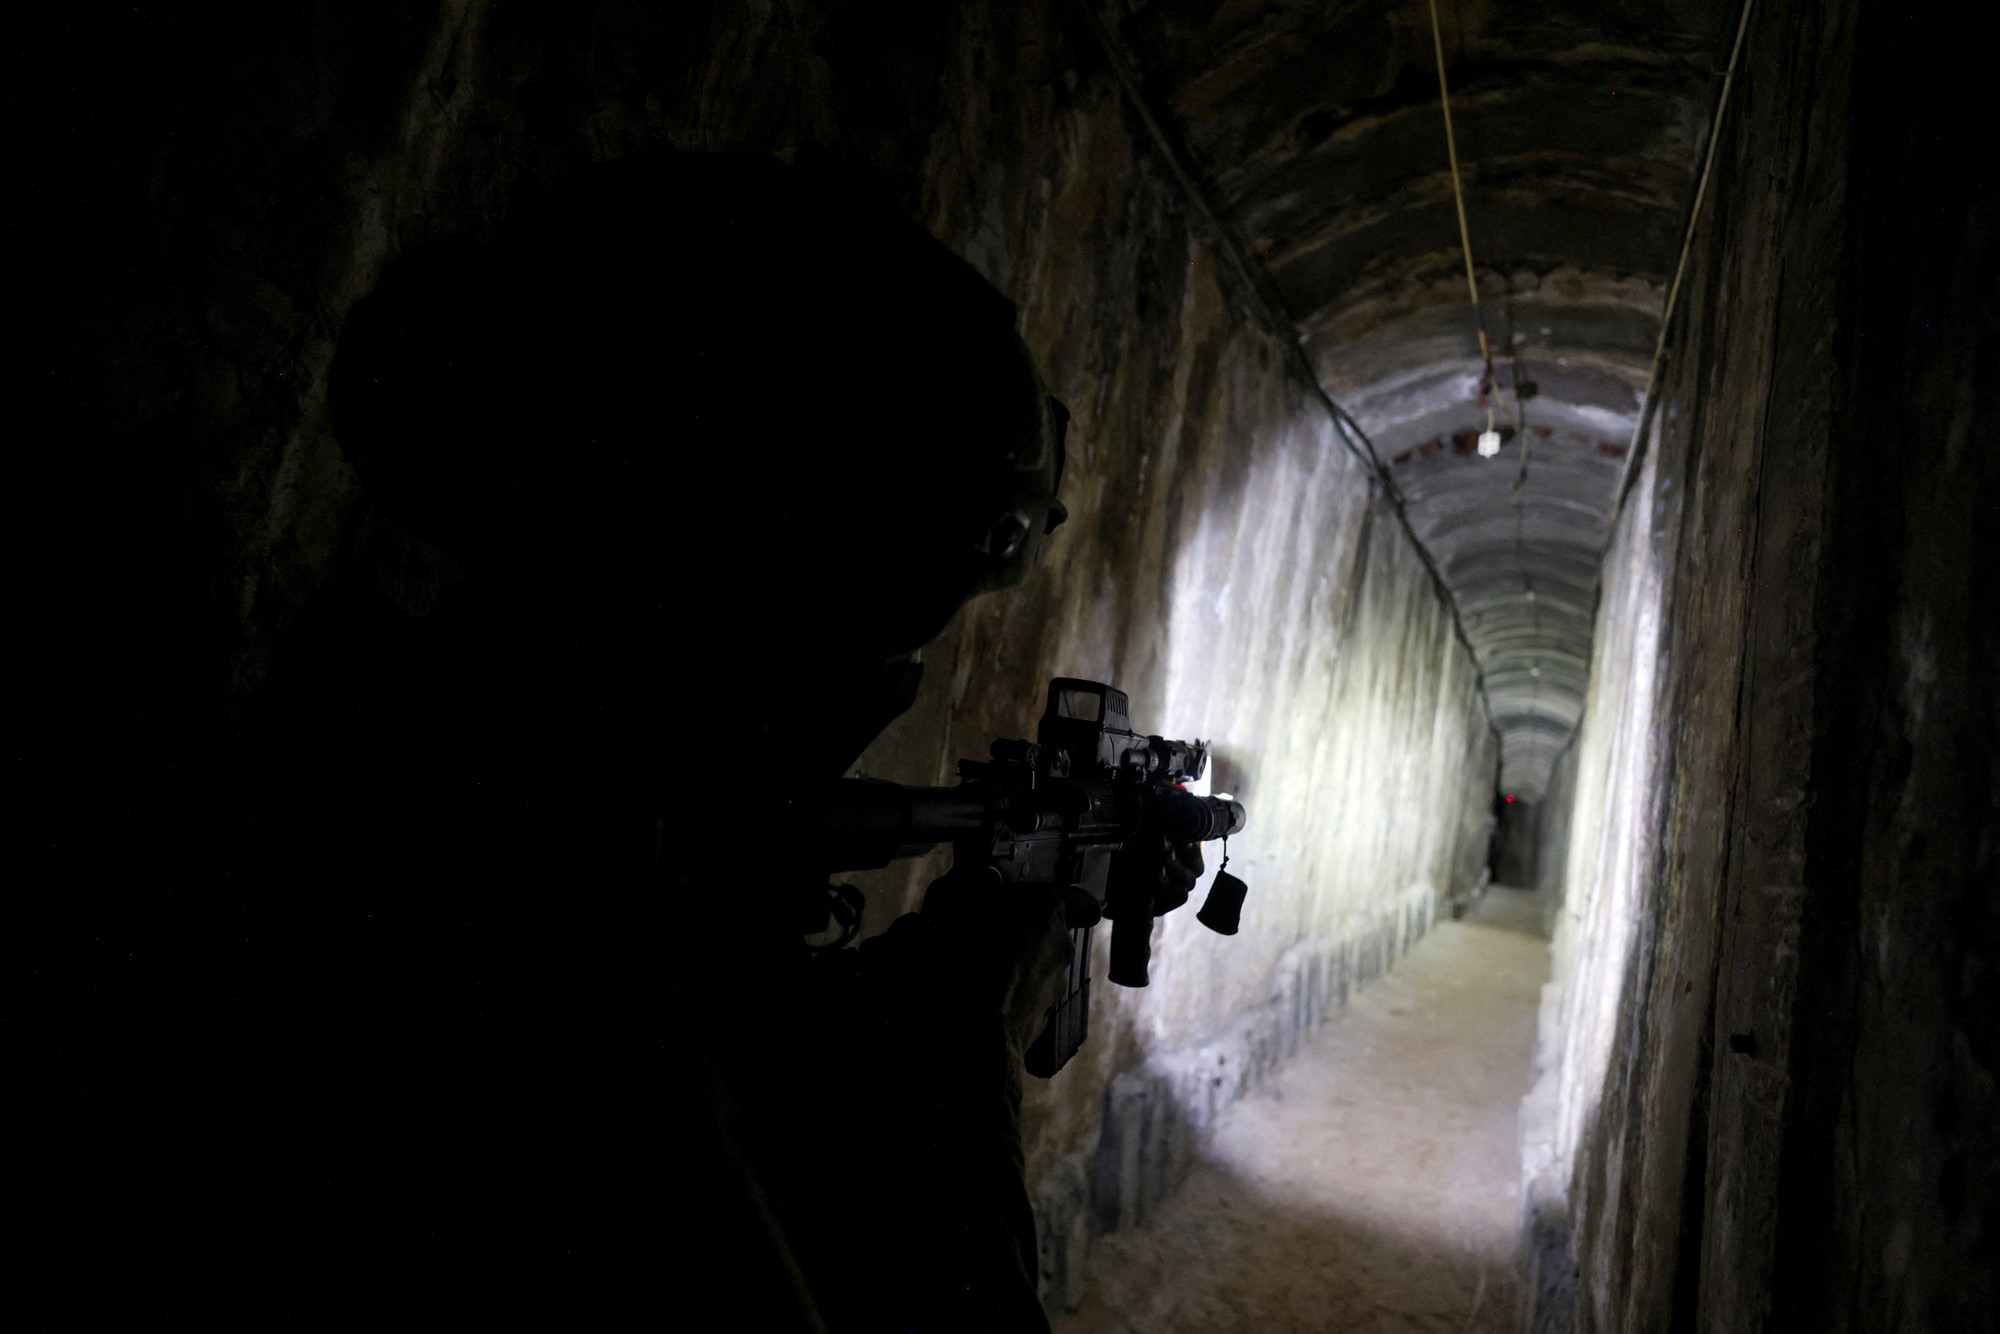 The silhouette of a soldier with a gun is pictured as a flashlight shines through a tunnel.